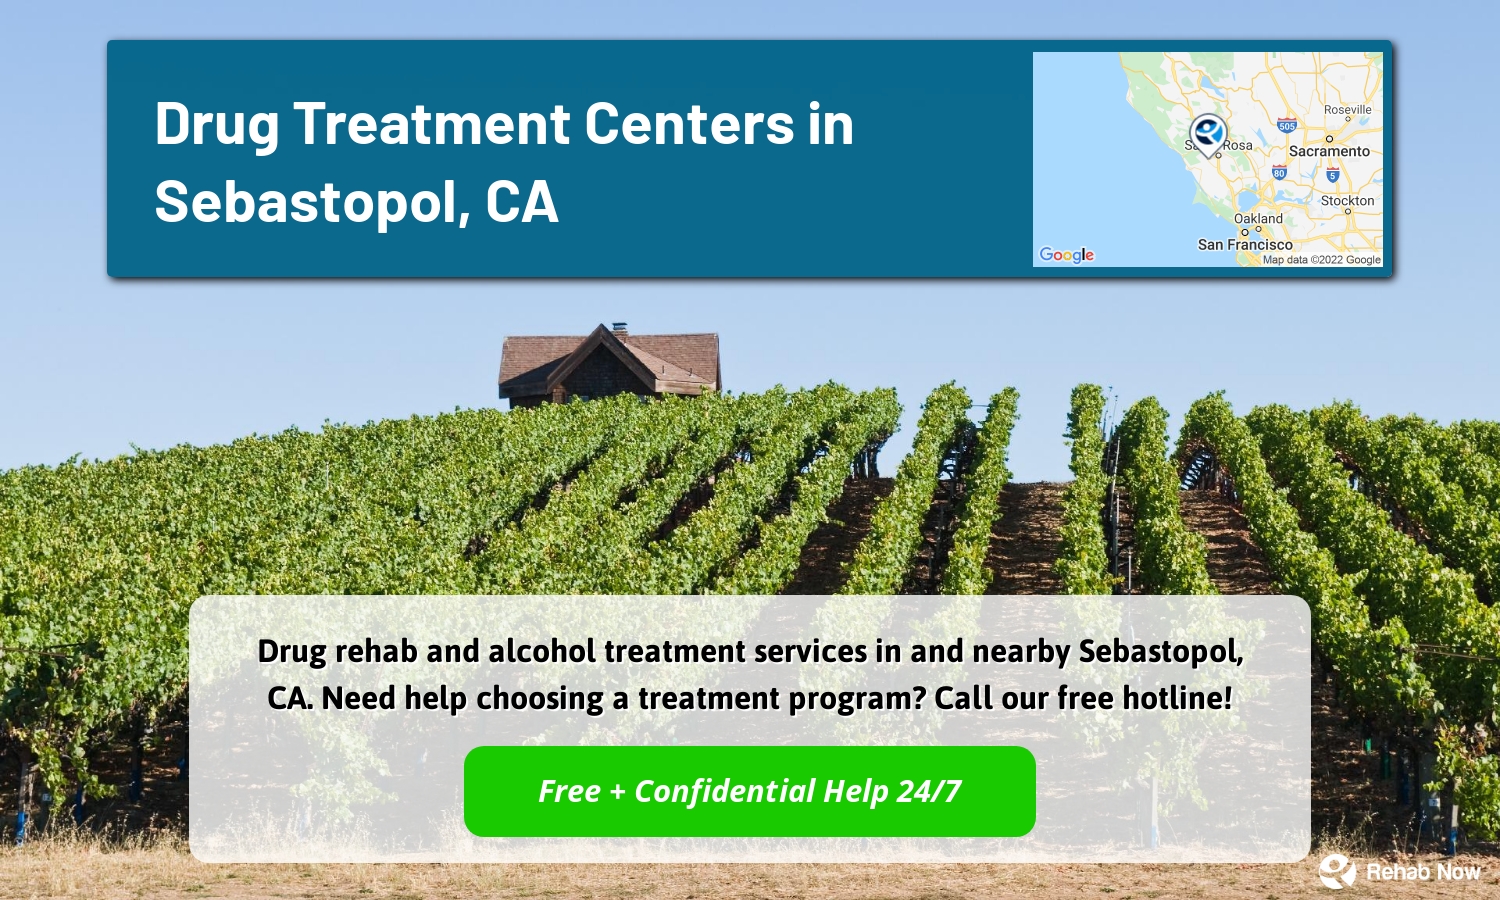 Drug rehab and alcohol treatment services in and nearby Sebastopol, CA. Need help choosing a treatment program? Call our free hotline!